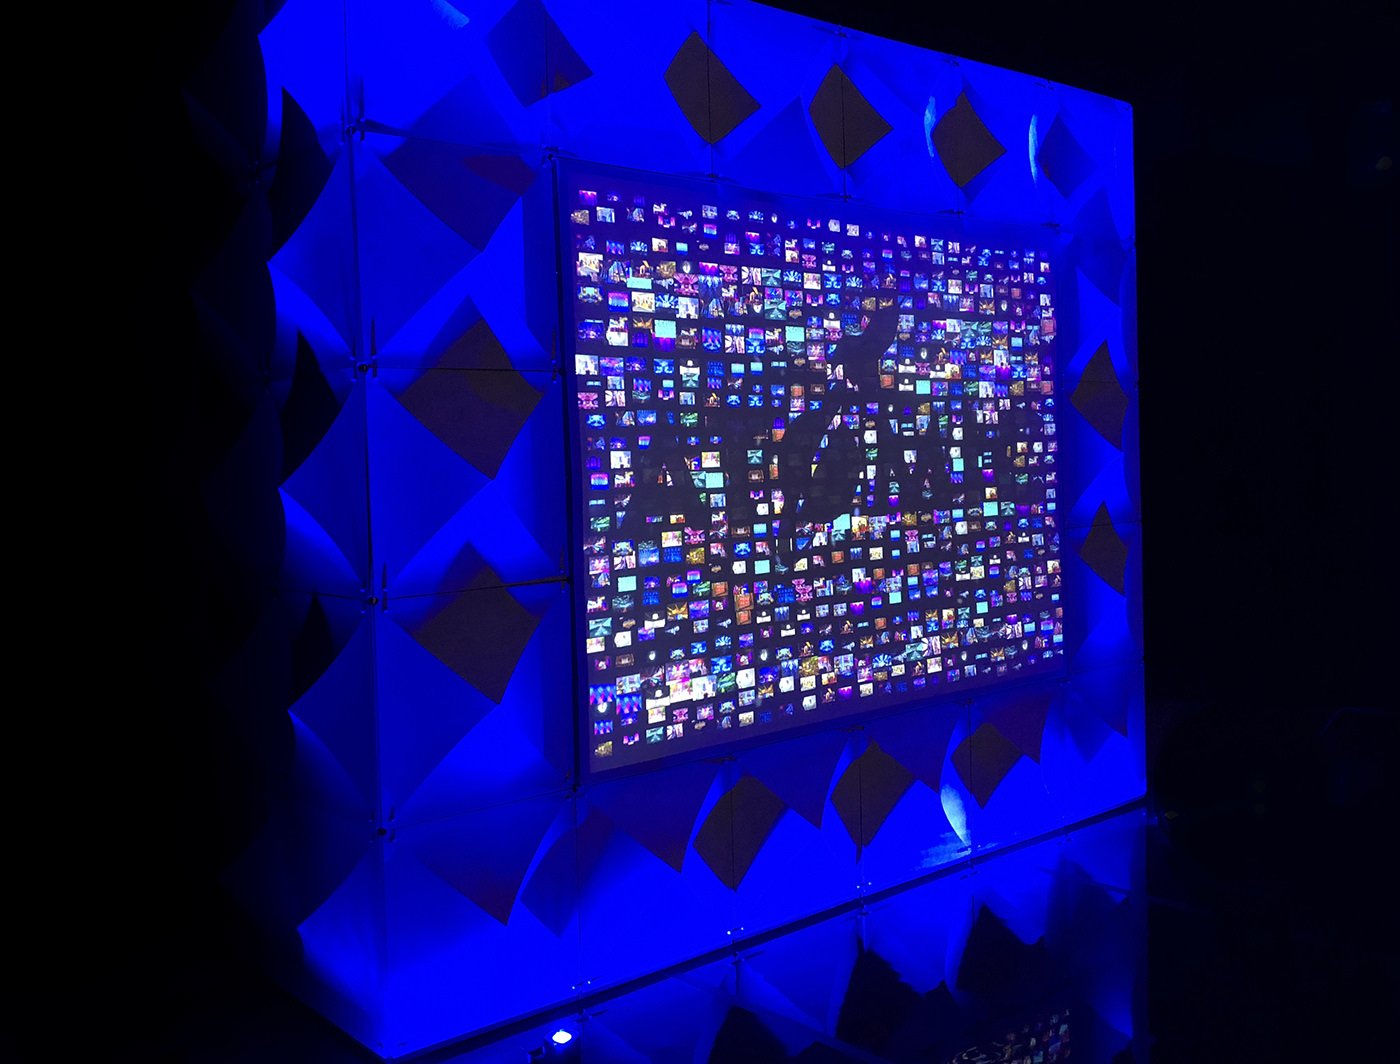 Rear projection shines on this xPRO screen